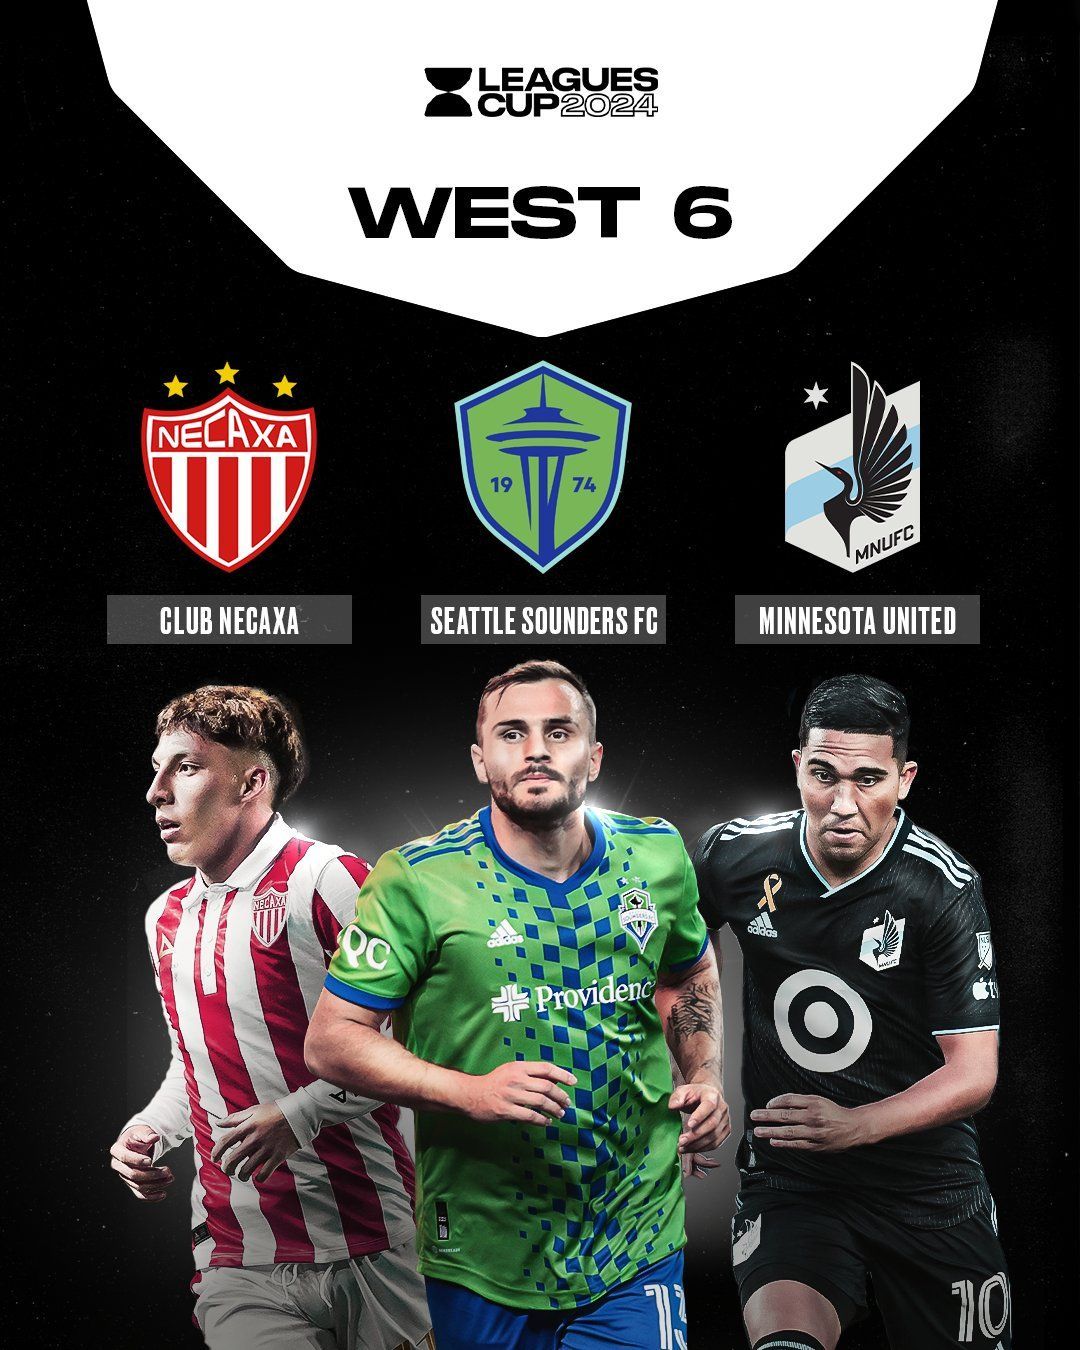 Leagues Cup: Seattle Sounders FC vs. Club Necaxa